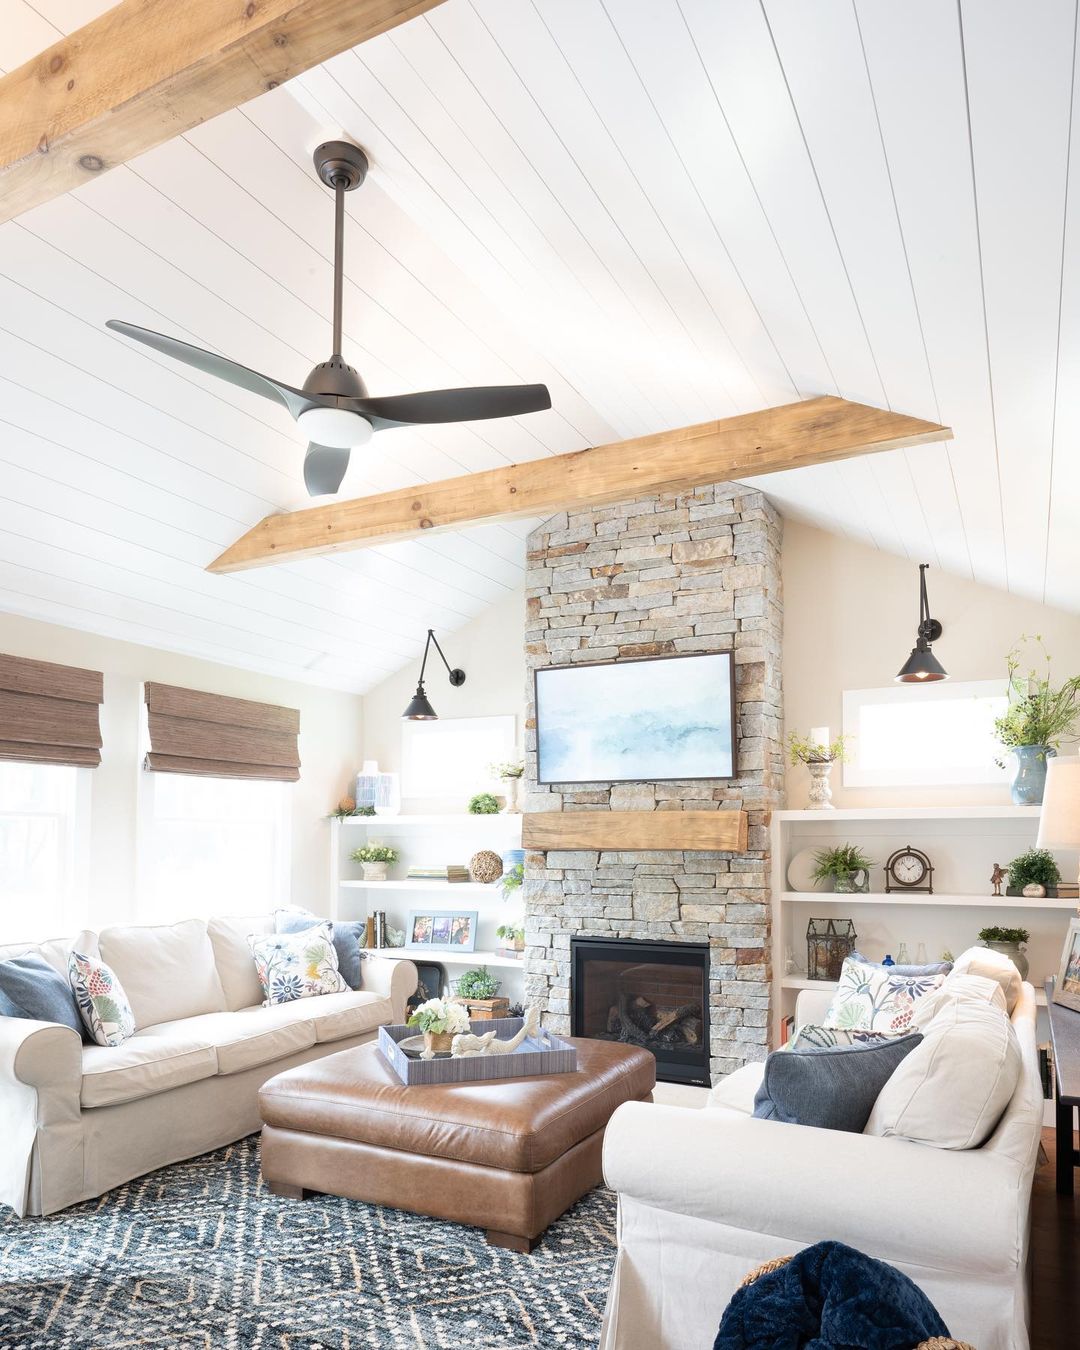 Minimalist Beams and Shiplap in Cozy Living Spaces